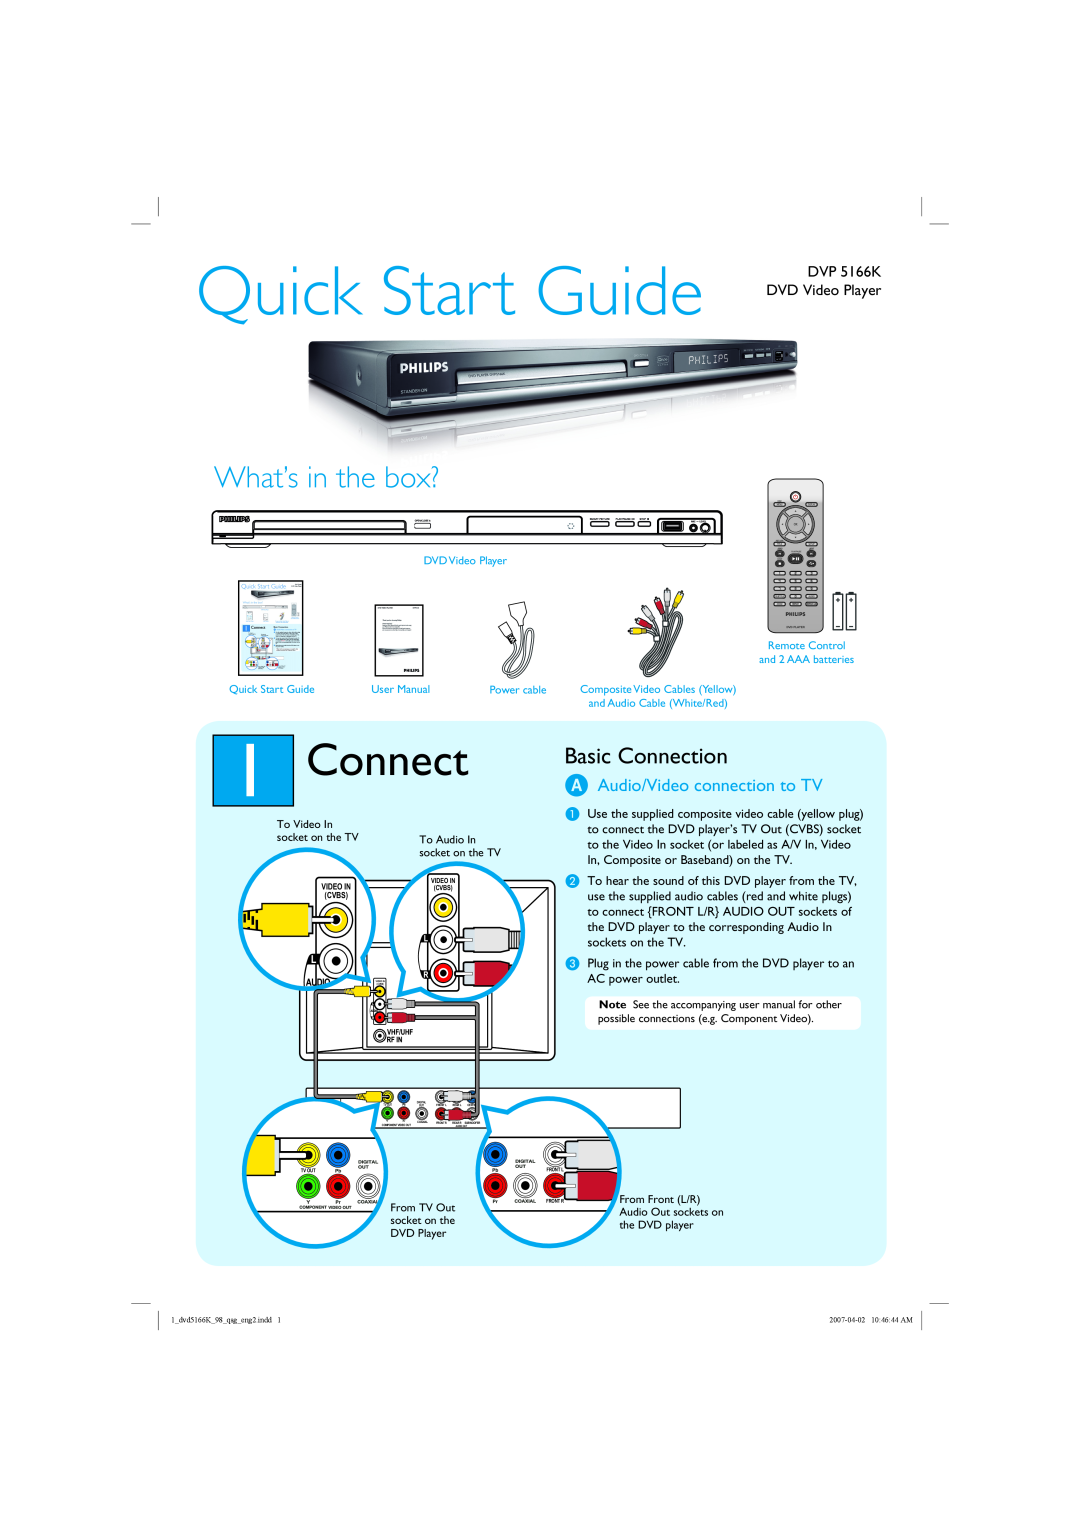 Philips DVP 5166K quick start Connect, A Audio/Video connection to TV, Quick Start Guide, What’s in the box? 